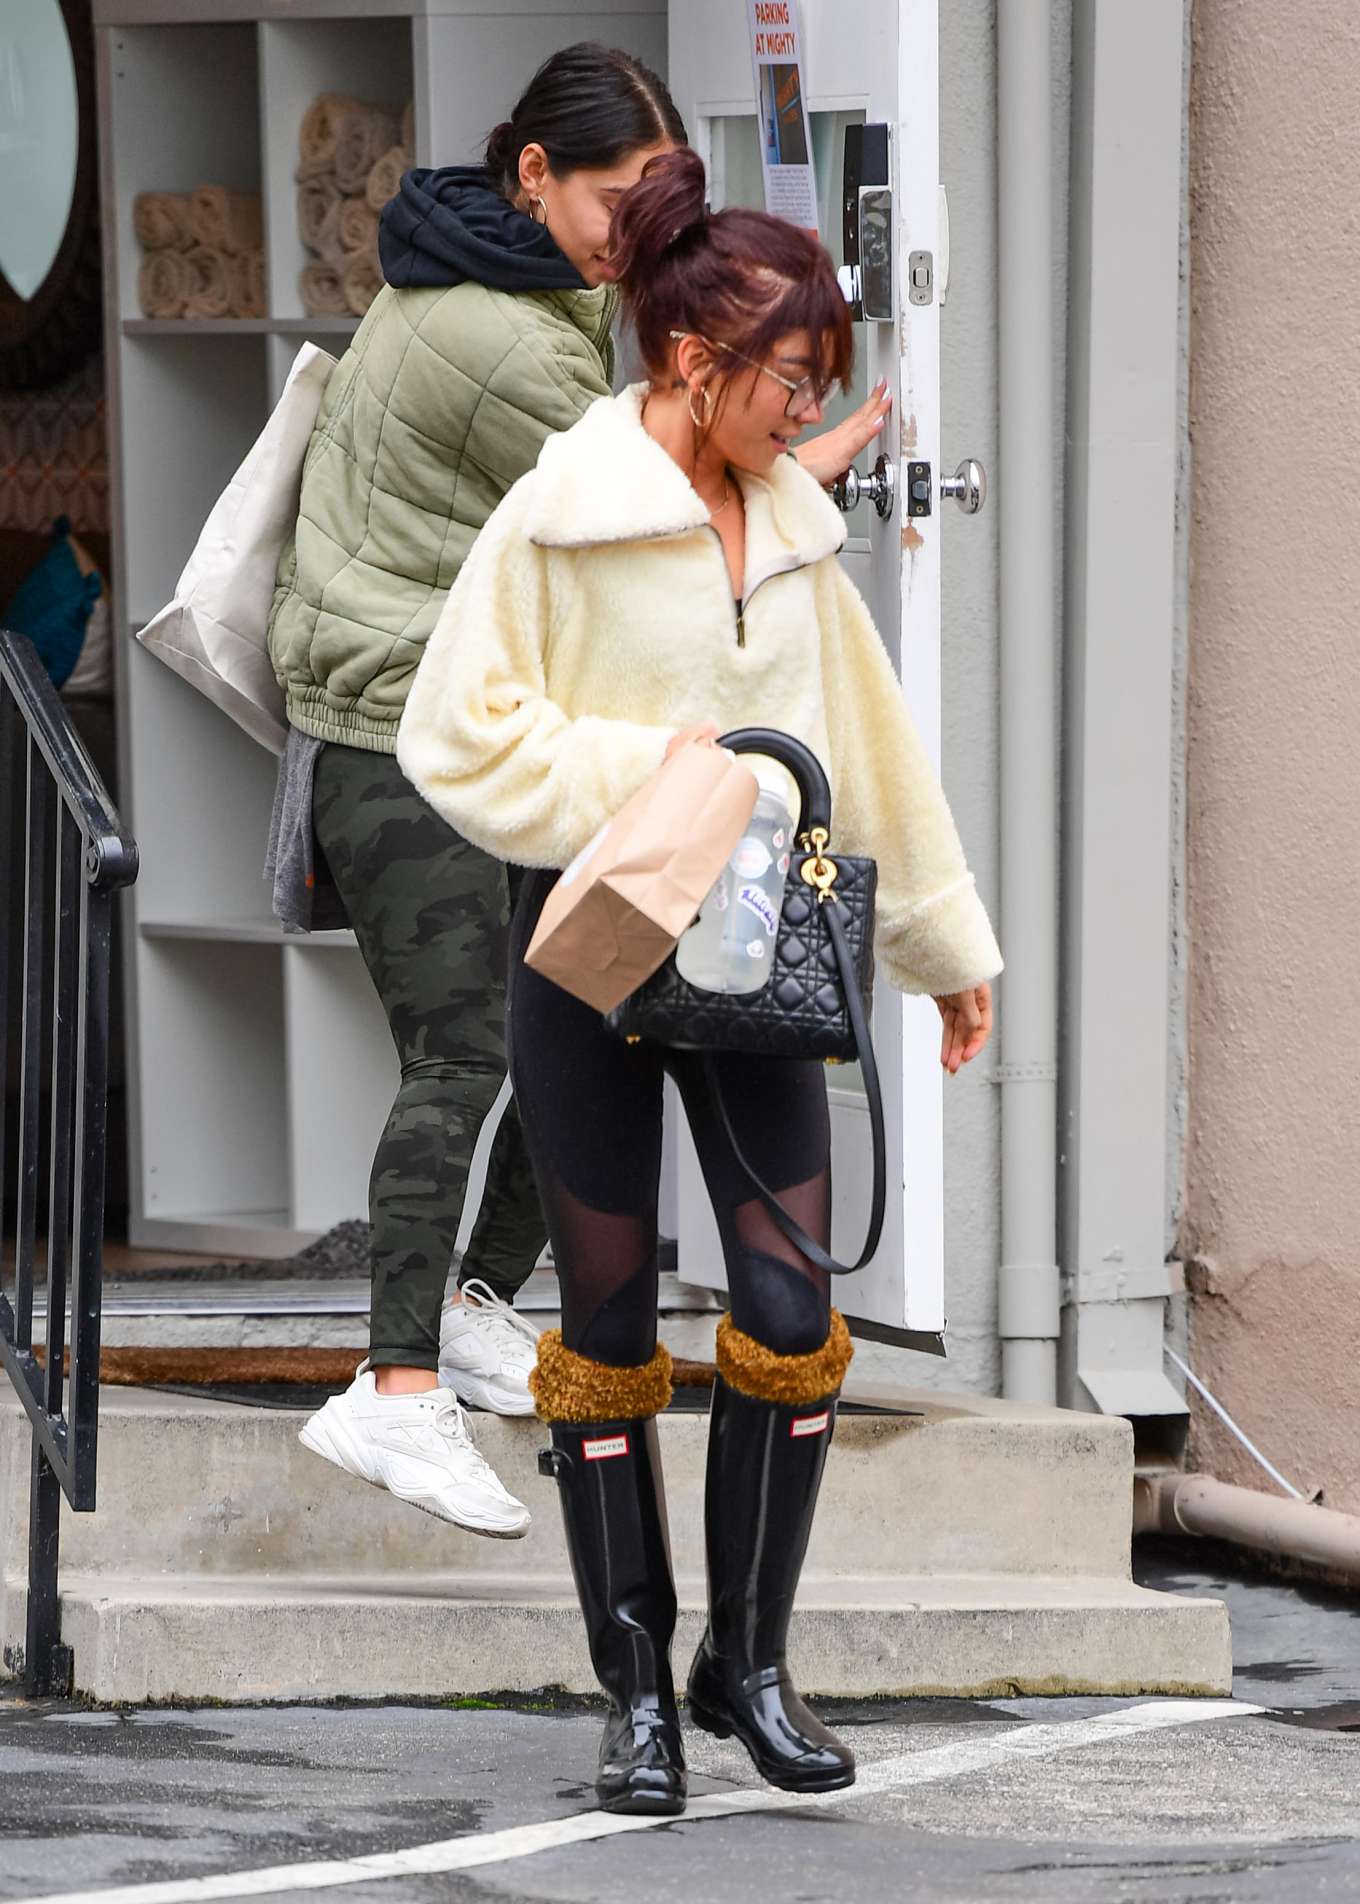 Sarah Hyland in Black Tights and Hunter Wellies Boots - Out and about in Lo...